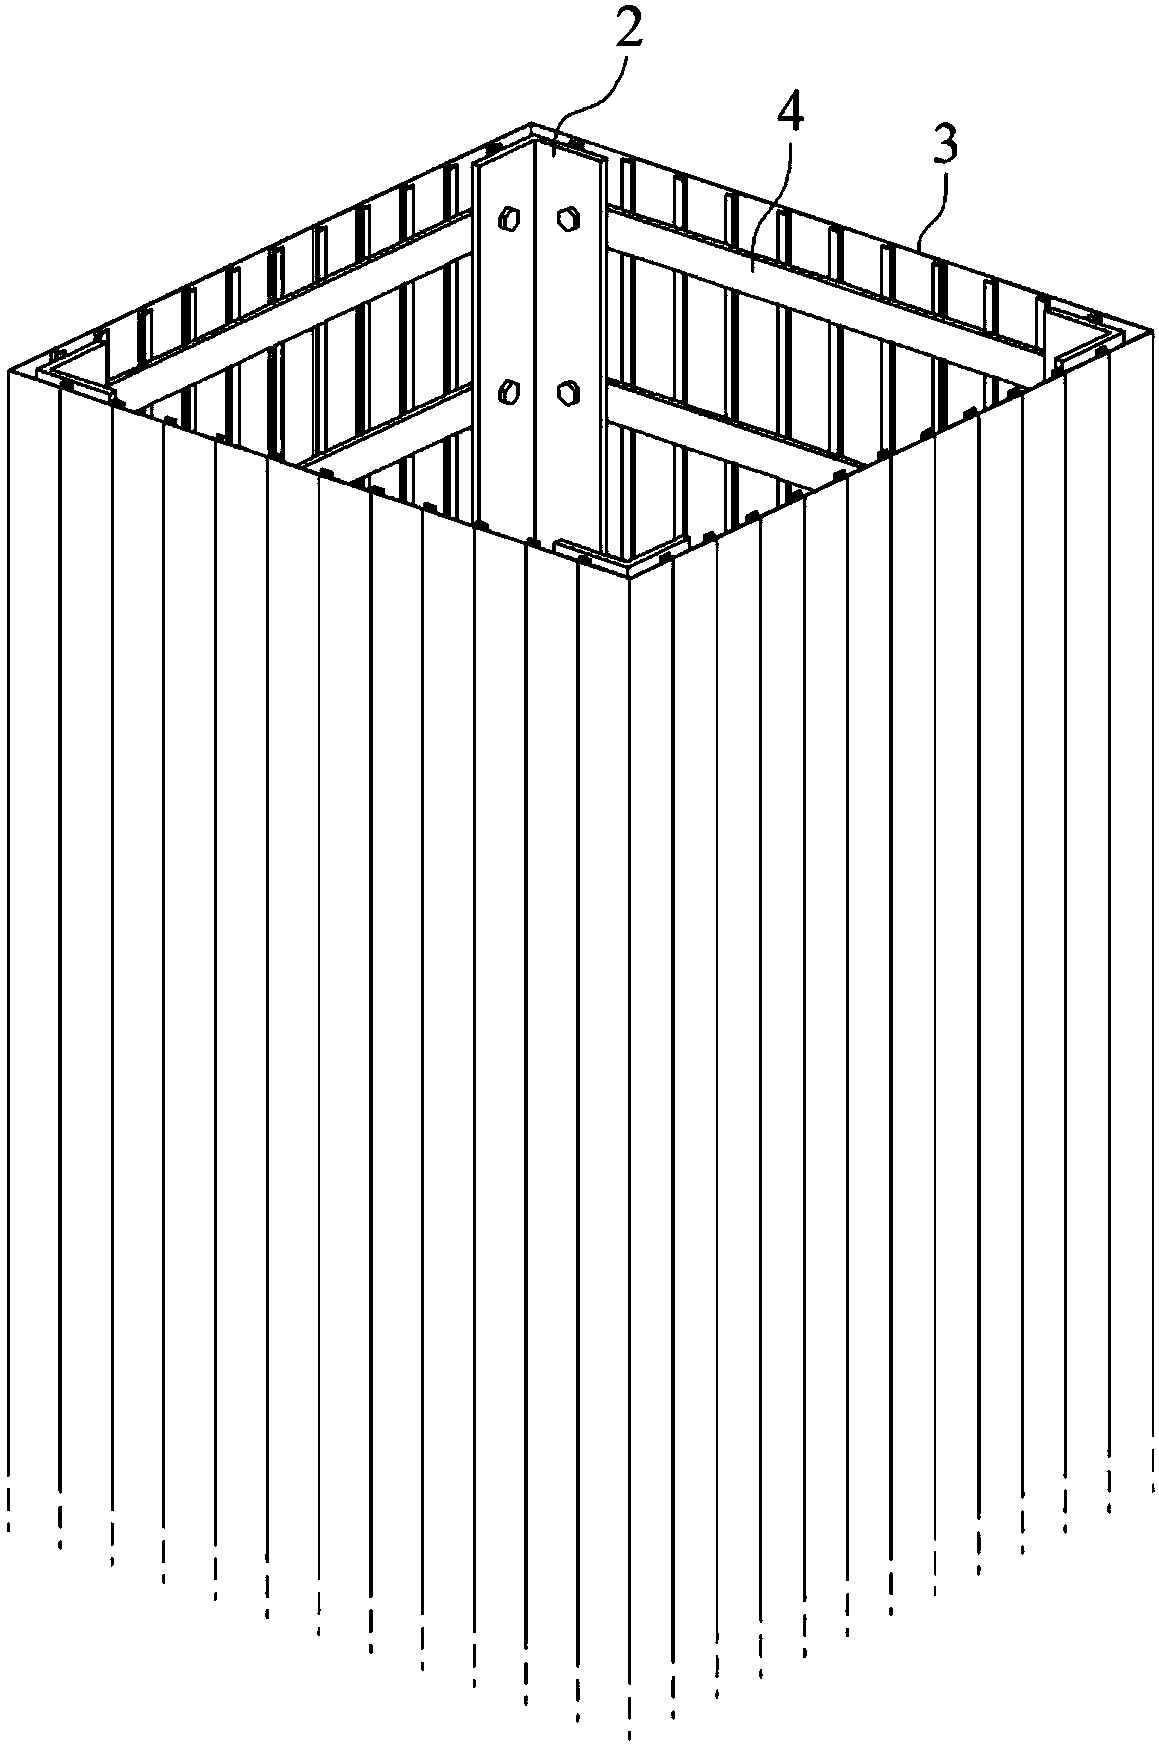 Structure for fixating deck formwork